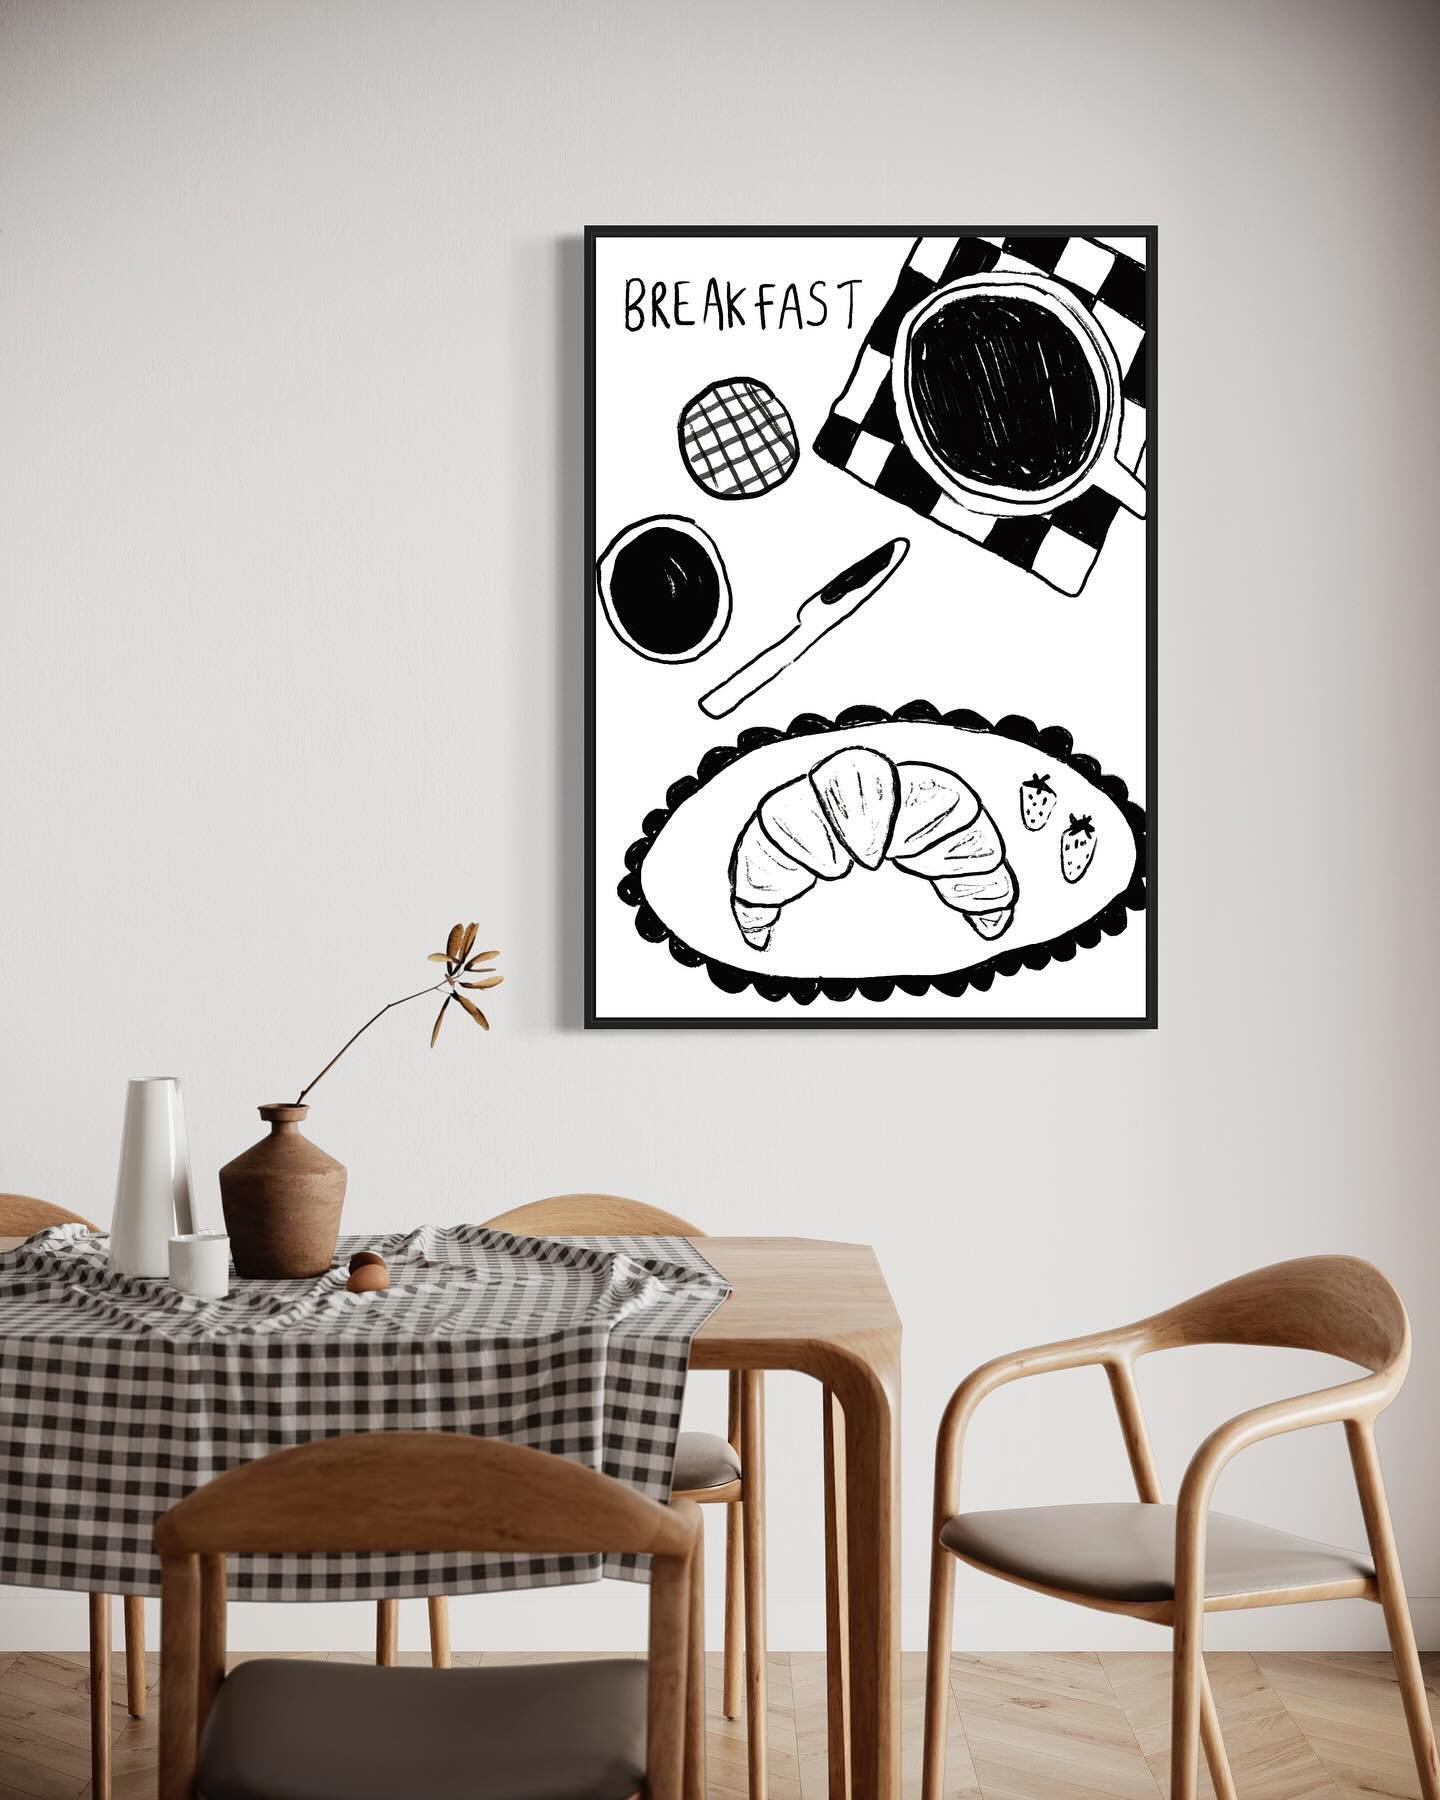 Who doesn&rsquo;t love coffee and a croissant 🥐 ☕️

Now available on my website, link in bio 

#artprint #art #wallart #monochromaticart #boldart #breakfast #brunch #kitchenart #kitchenaesthetic